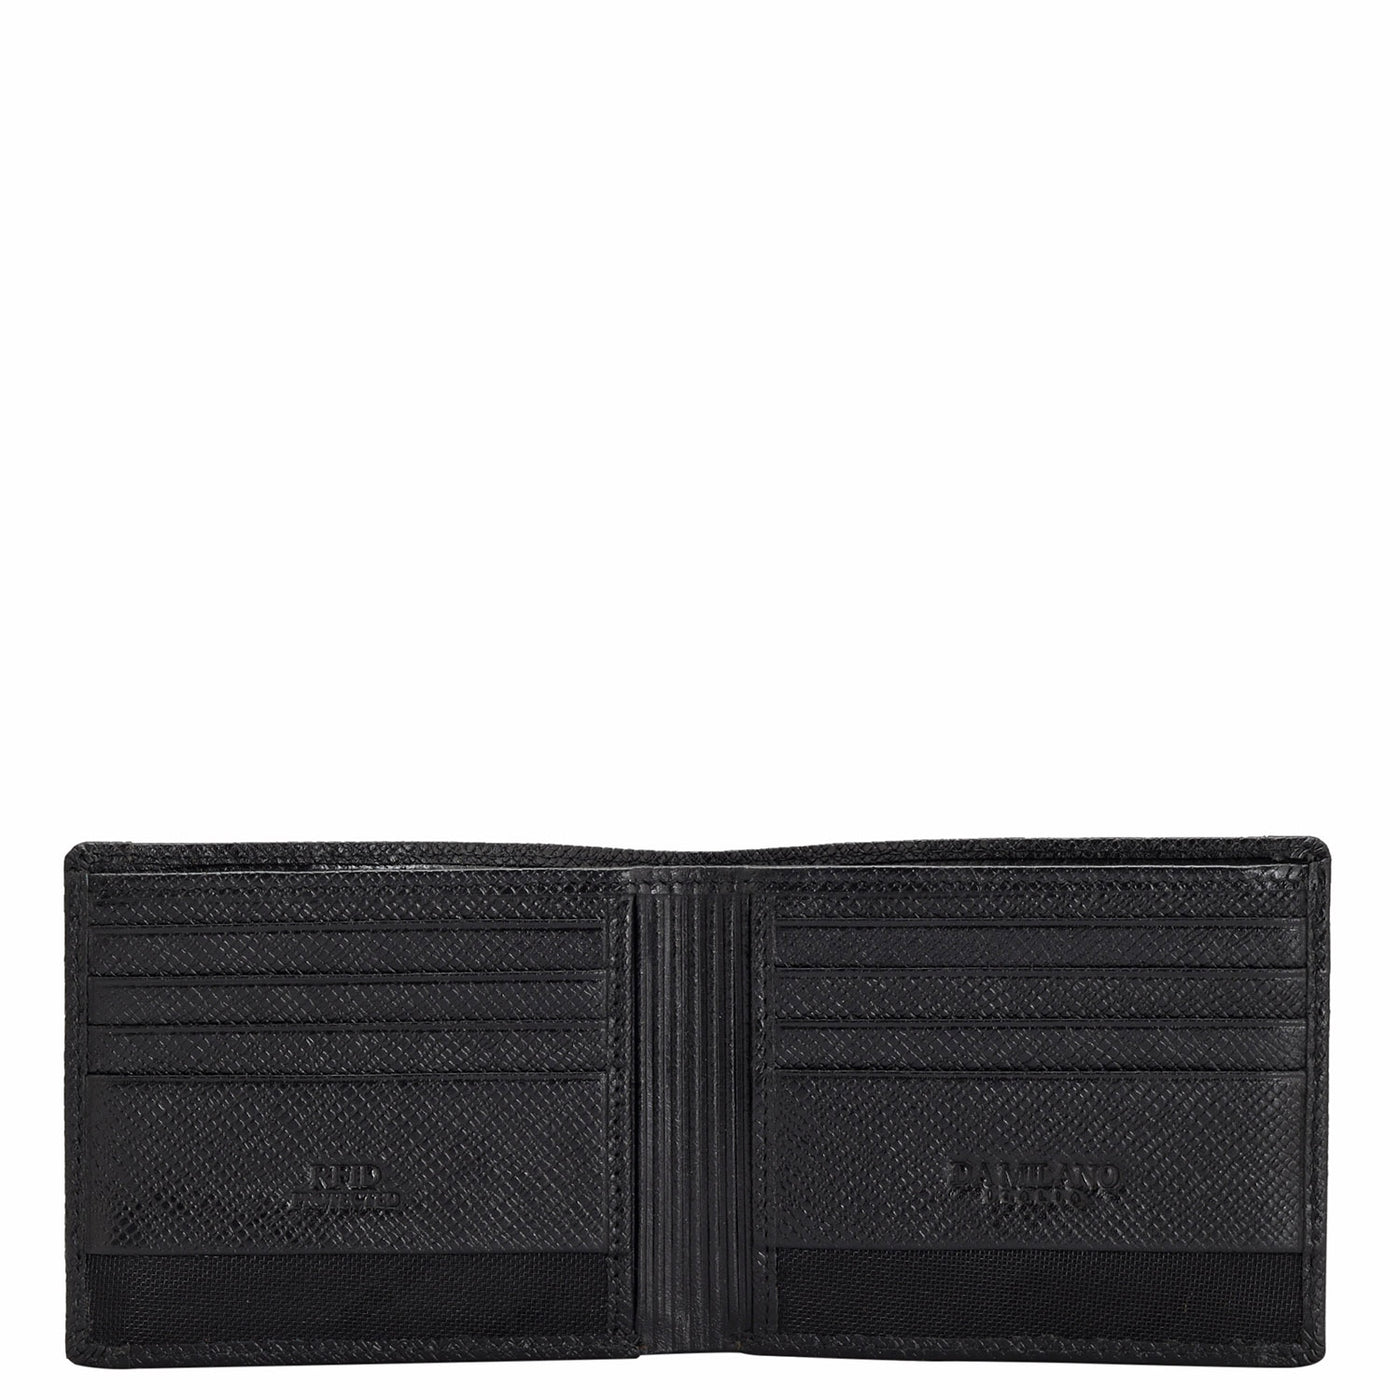 Croco Leather Mens Wallet - Military Green